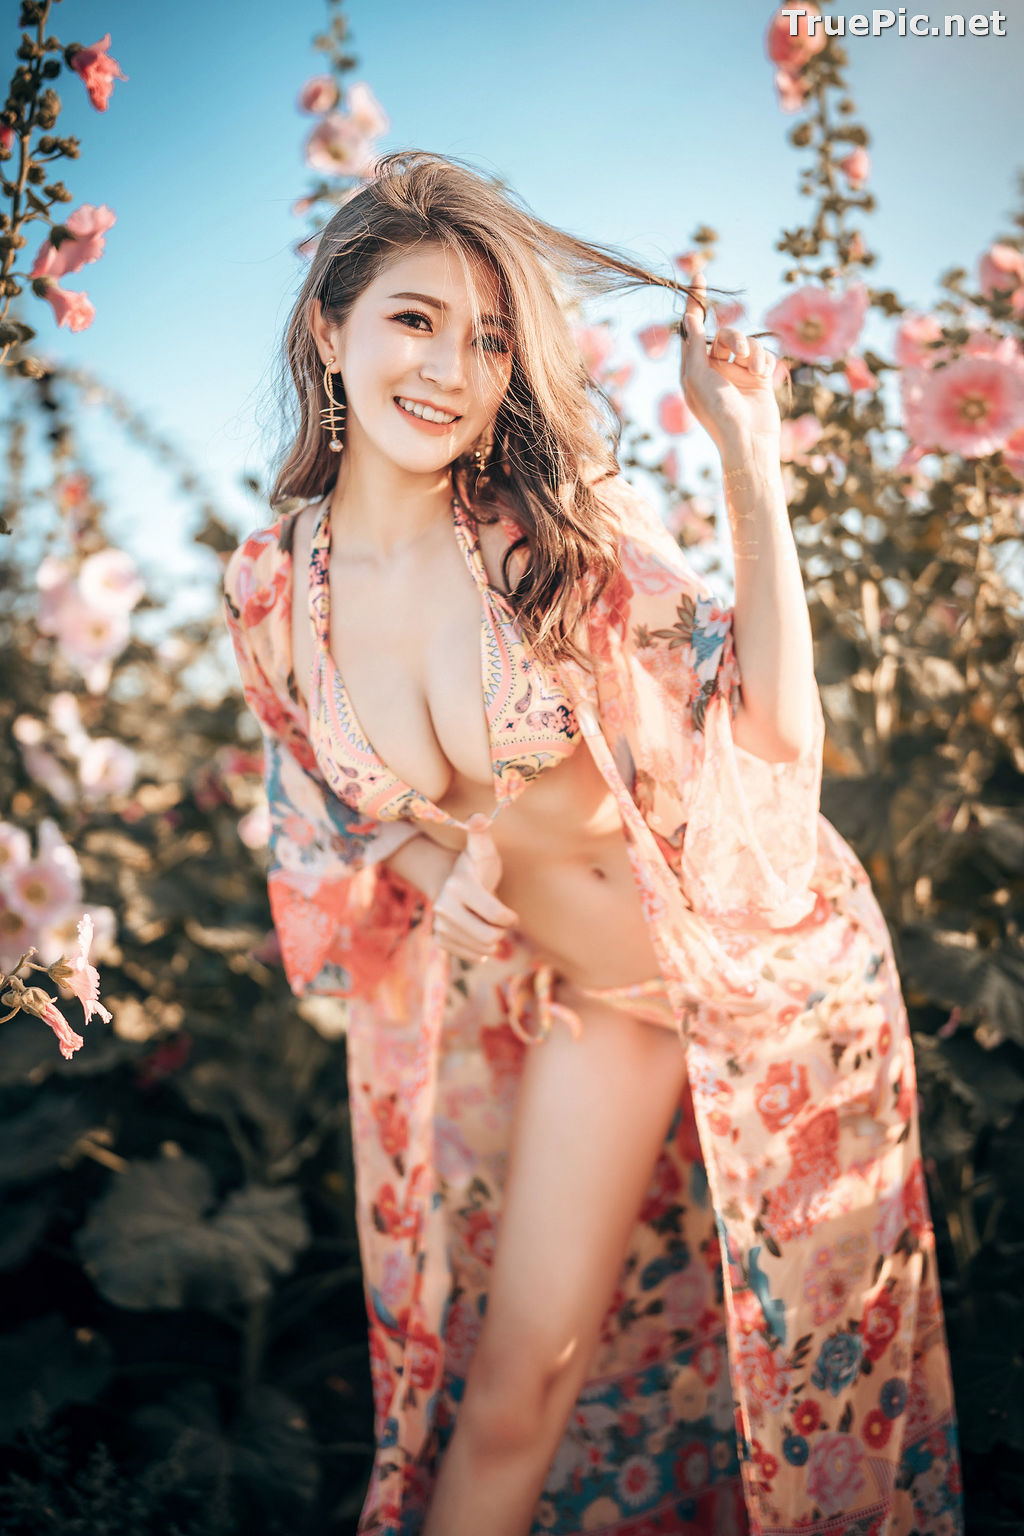 Image Taiwanese Model - 珈伊Femi - Sexy Beautiful Girl at Hollyhock Garden - TruePic.net - Picture-3